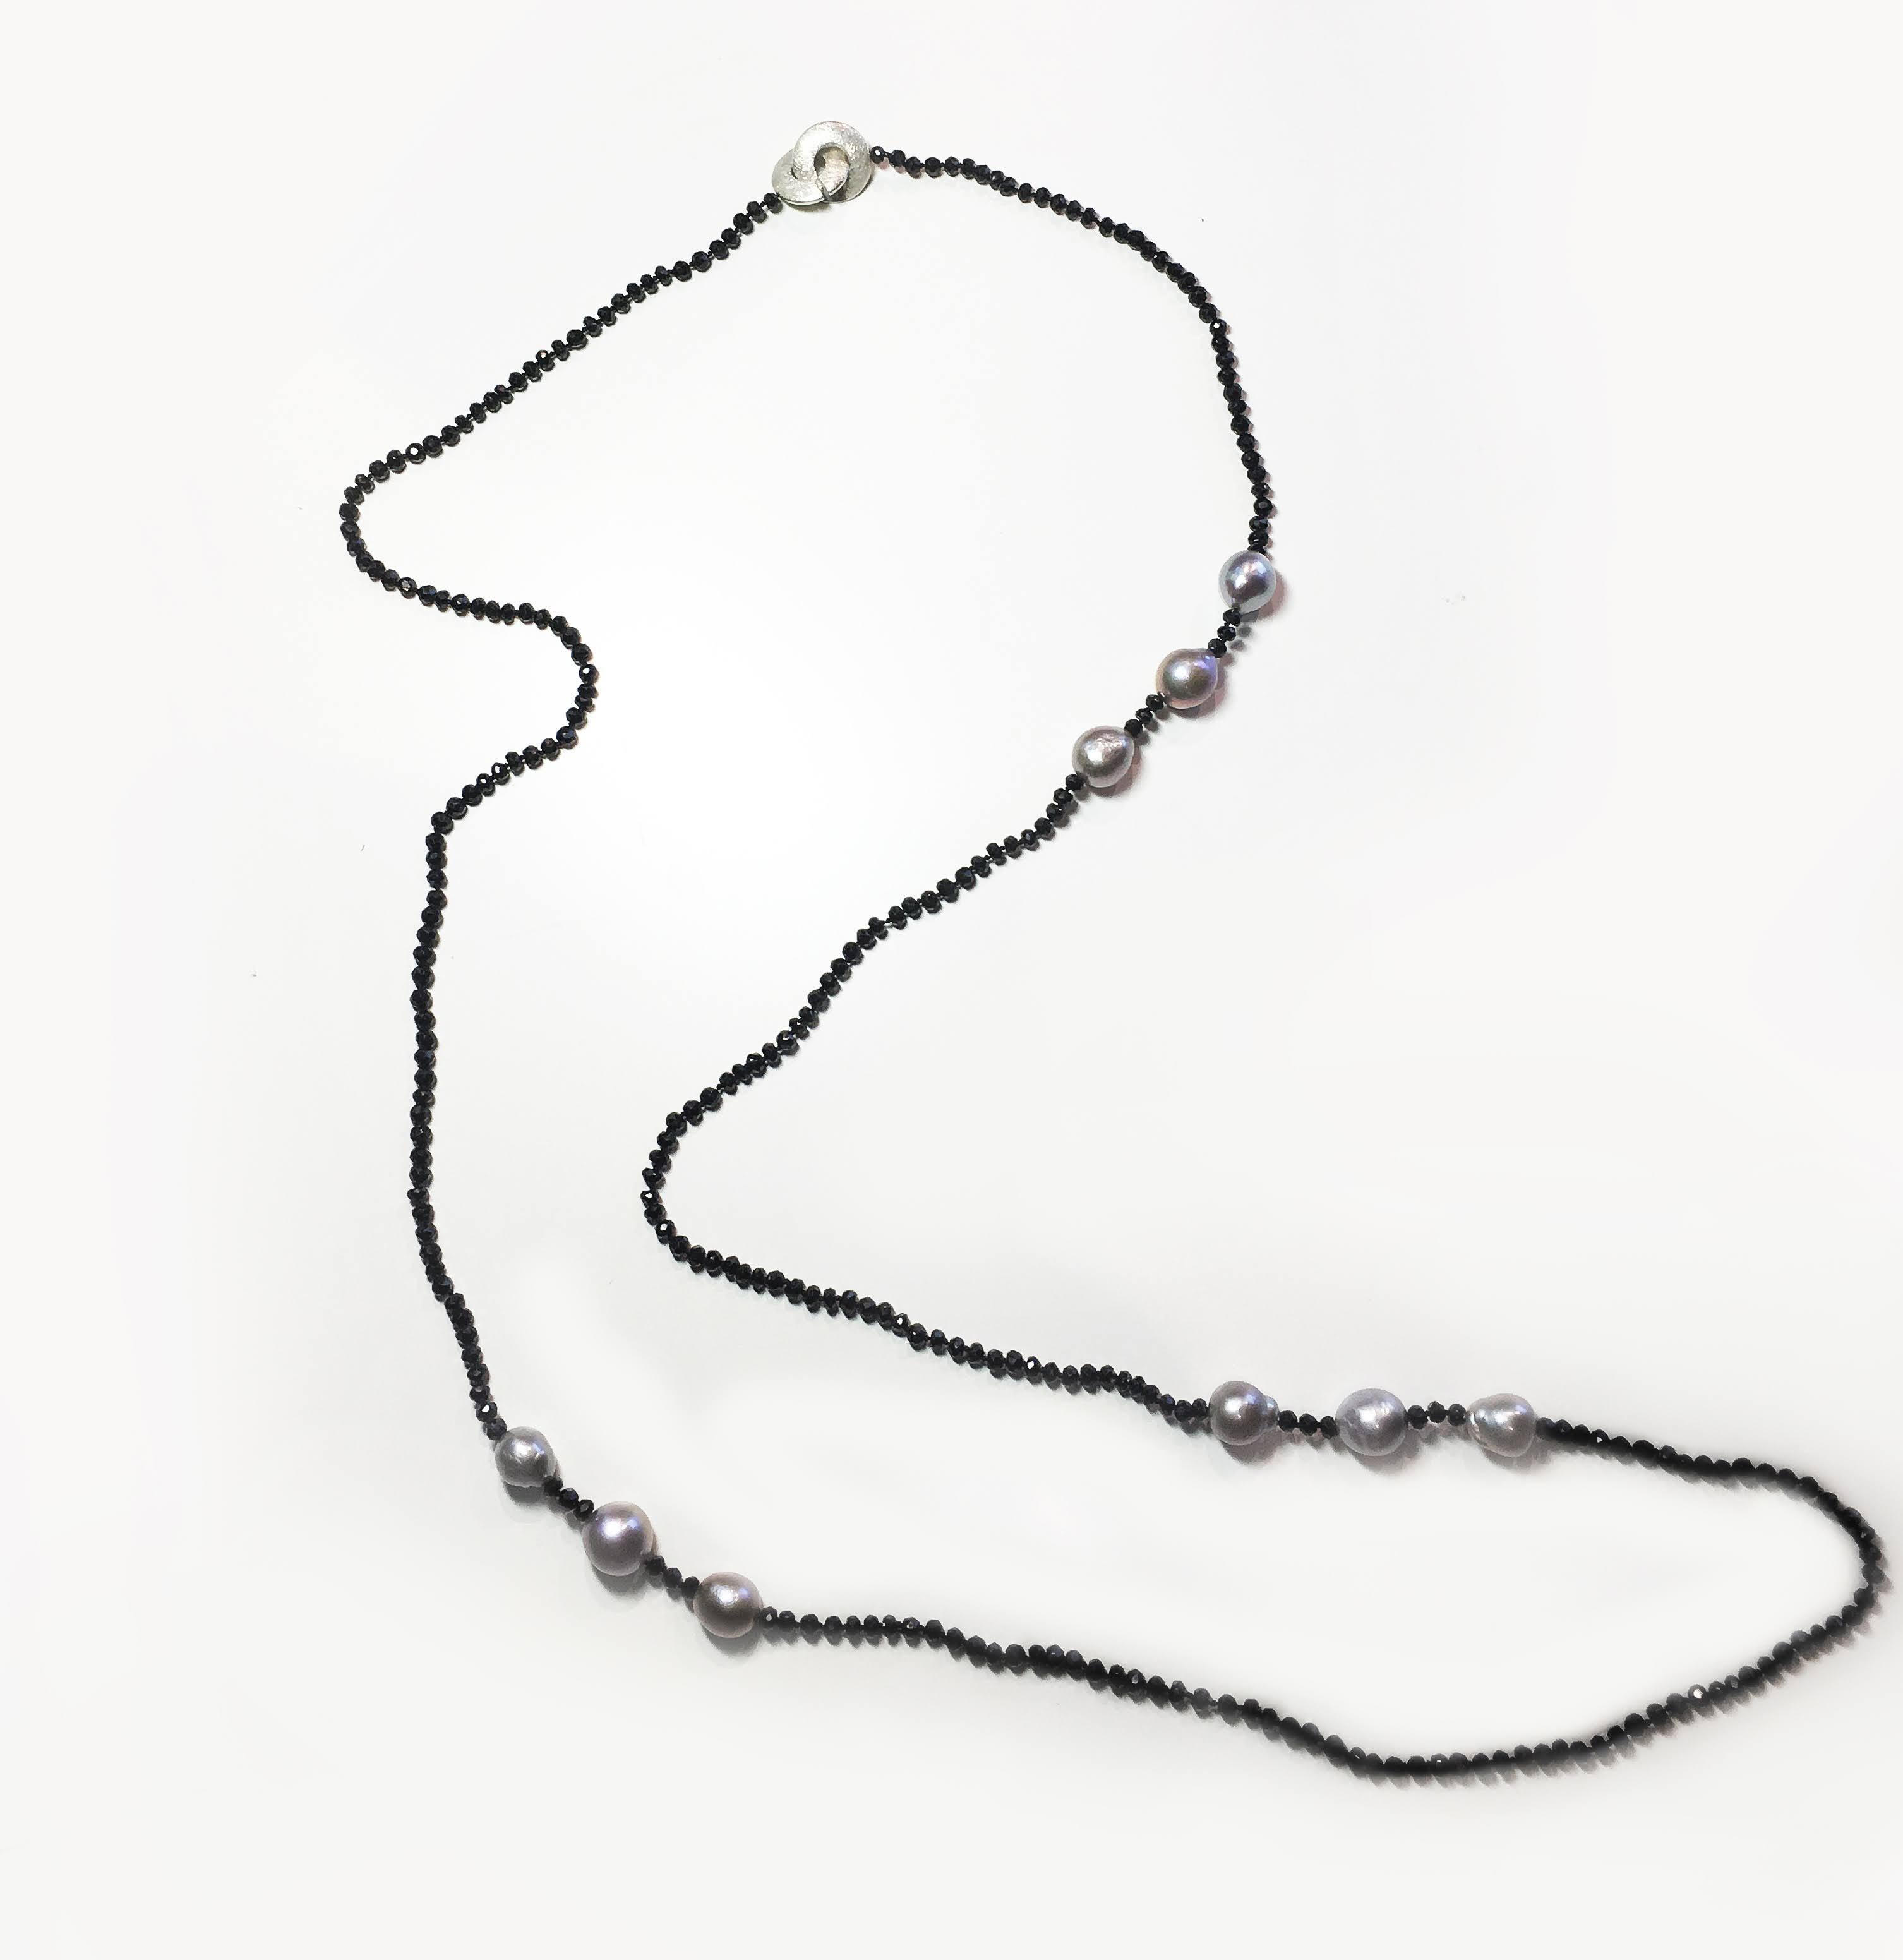 Add some chic sparkle and edge with this one-of-a-kind black spinel and grey baroque pearl long necklace with textured sterling silver interlocking clasp. Necklace is knotted between each bead. Can be worn single, double layered, or as a lariat.